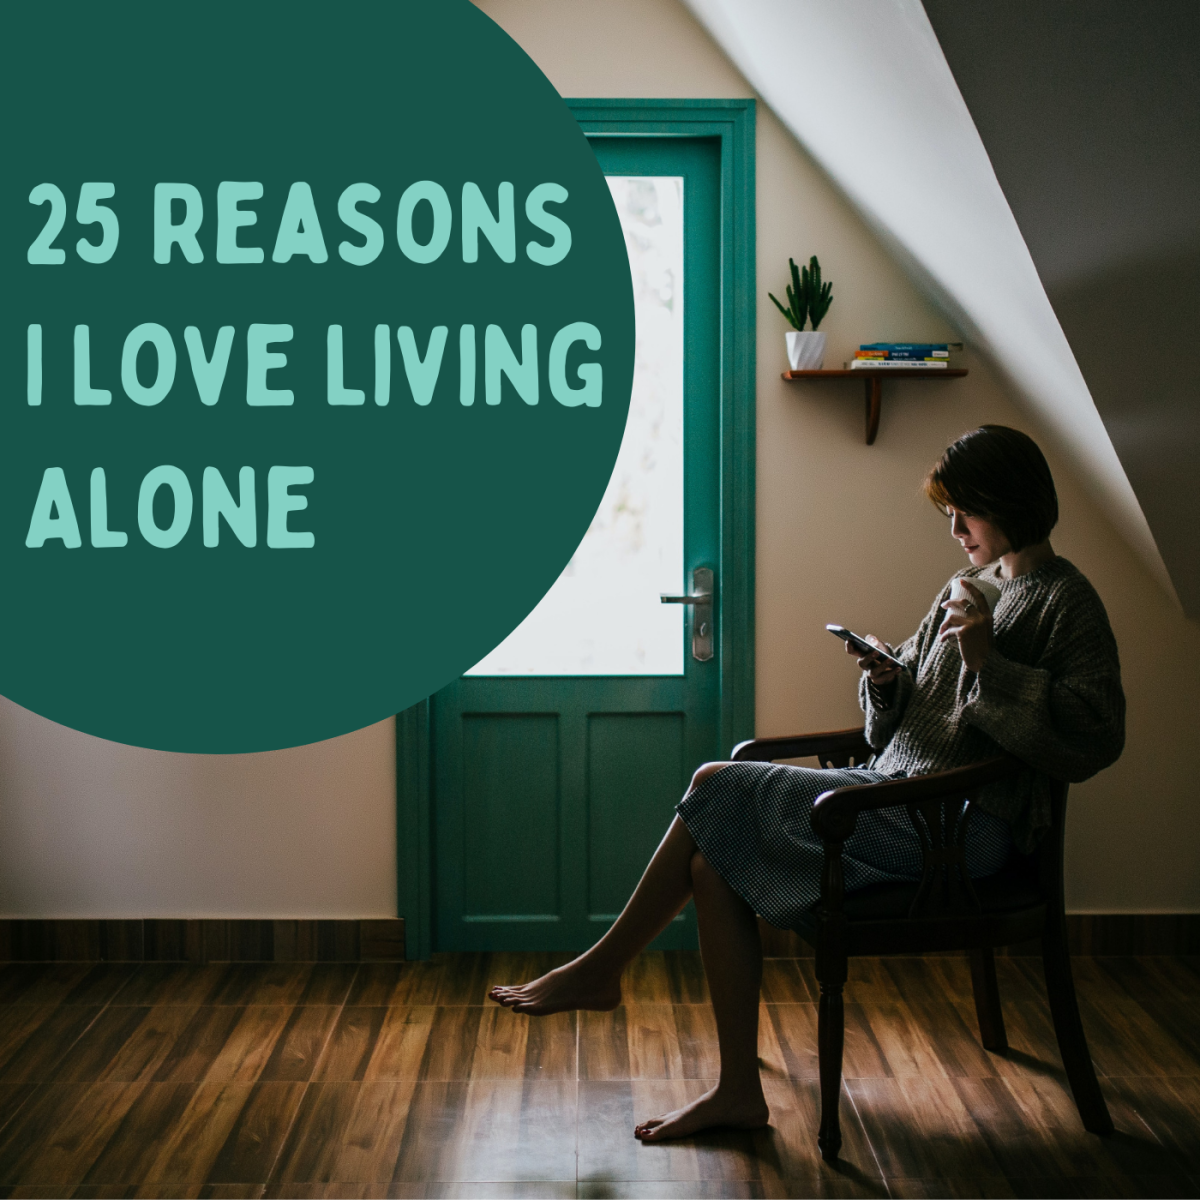 25 Reasons to Love Living Alone